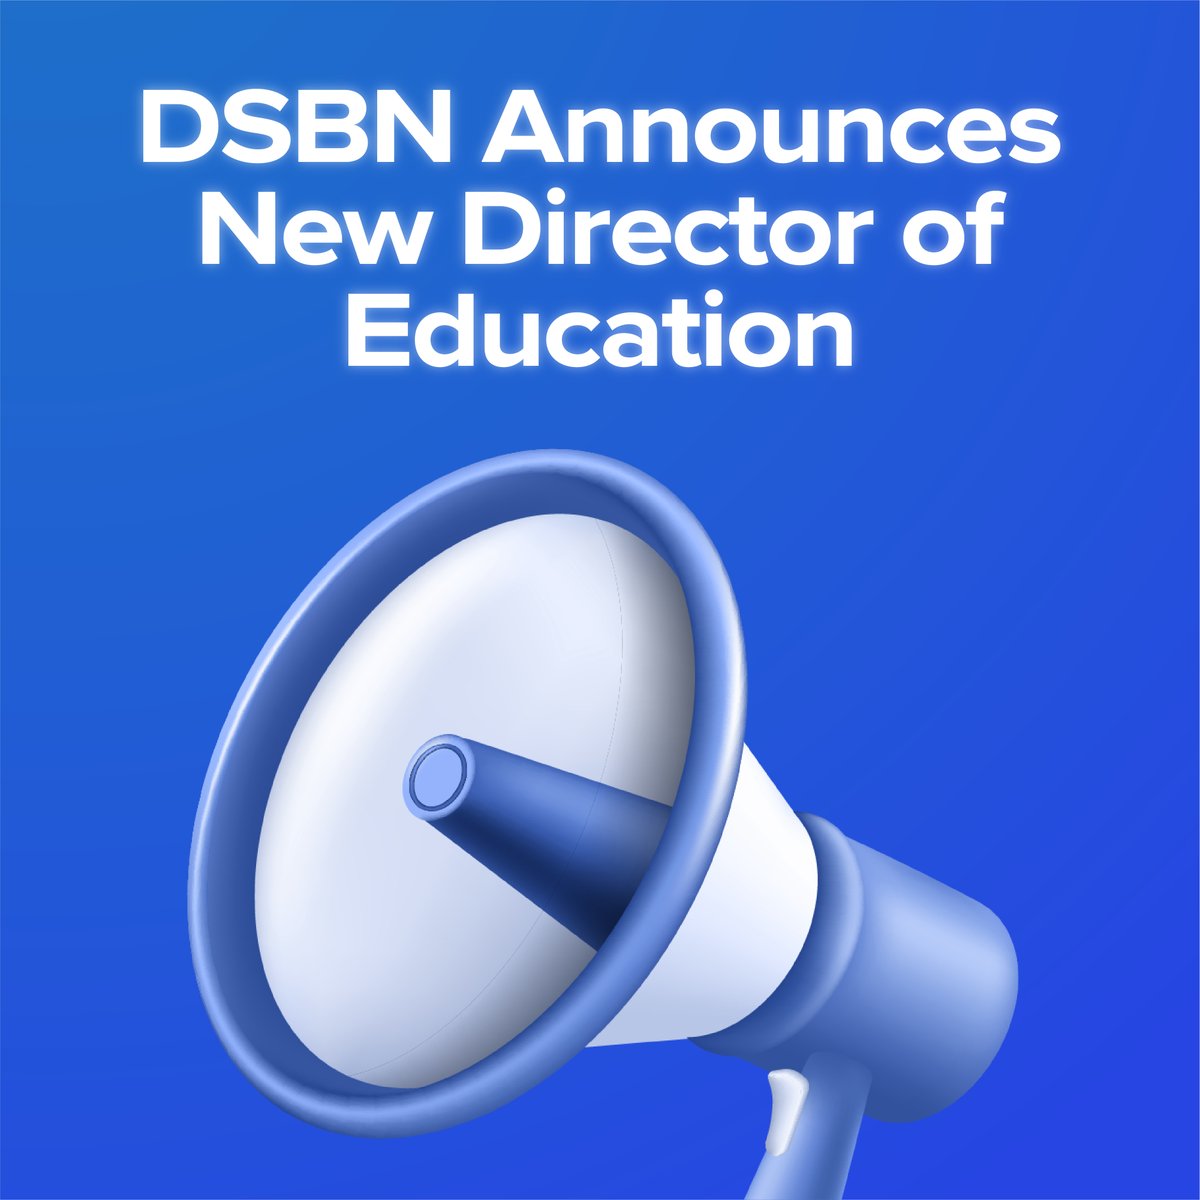 Kelly Pisek has been appointed the Director of Education and will begin her new role on January 1, 2024. With over 30 years' experience with the DSBN, Kelly is known for her commitment to education, focus on equity and putting students' first. Learn more: dsbn.org/news-release/2…